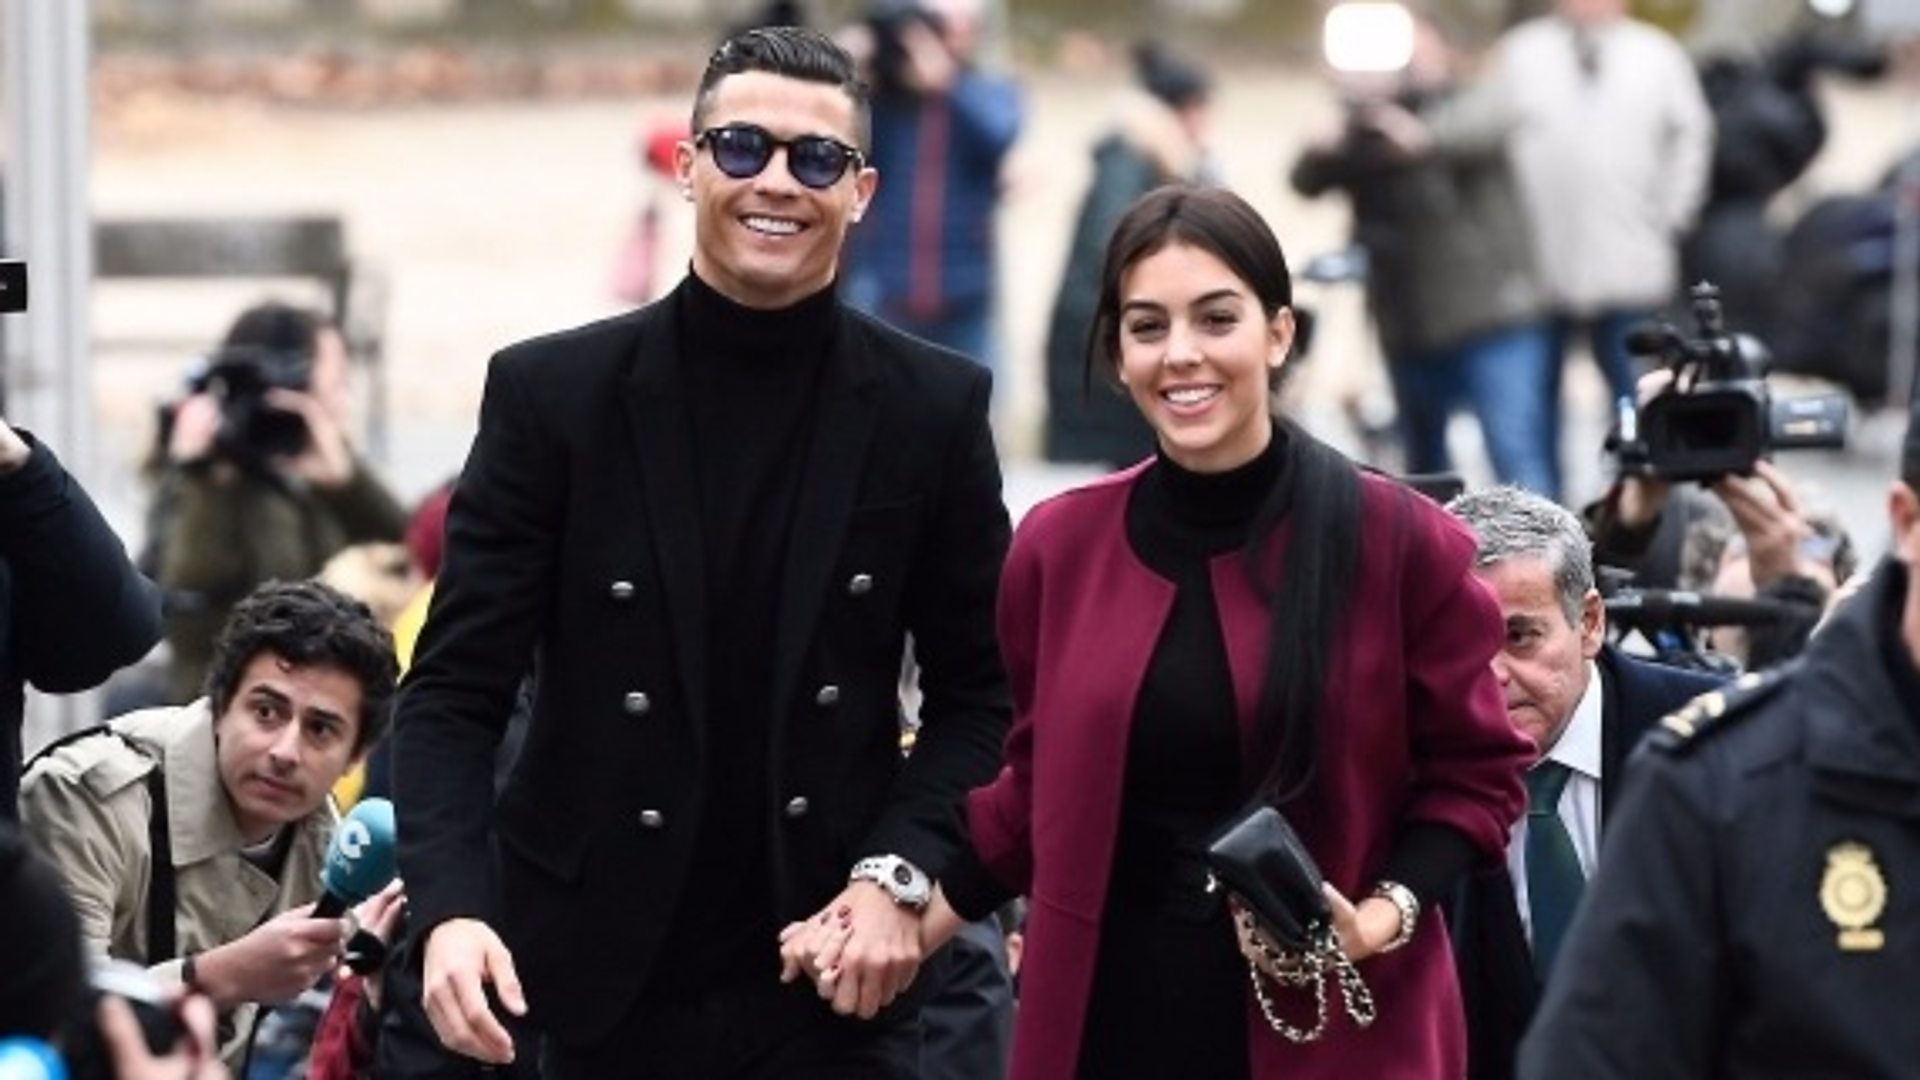 Ronaldo signs autograph on way to court